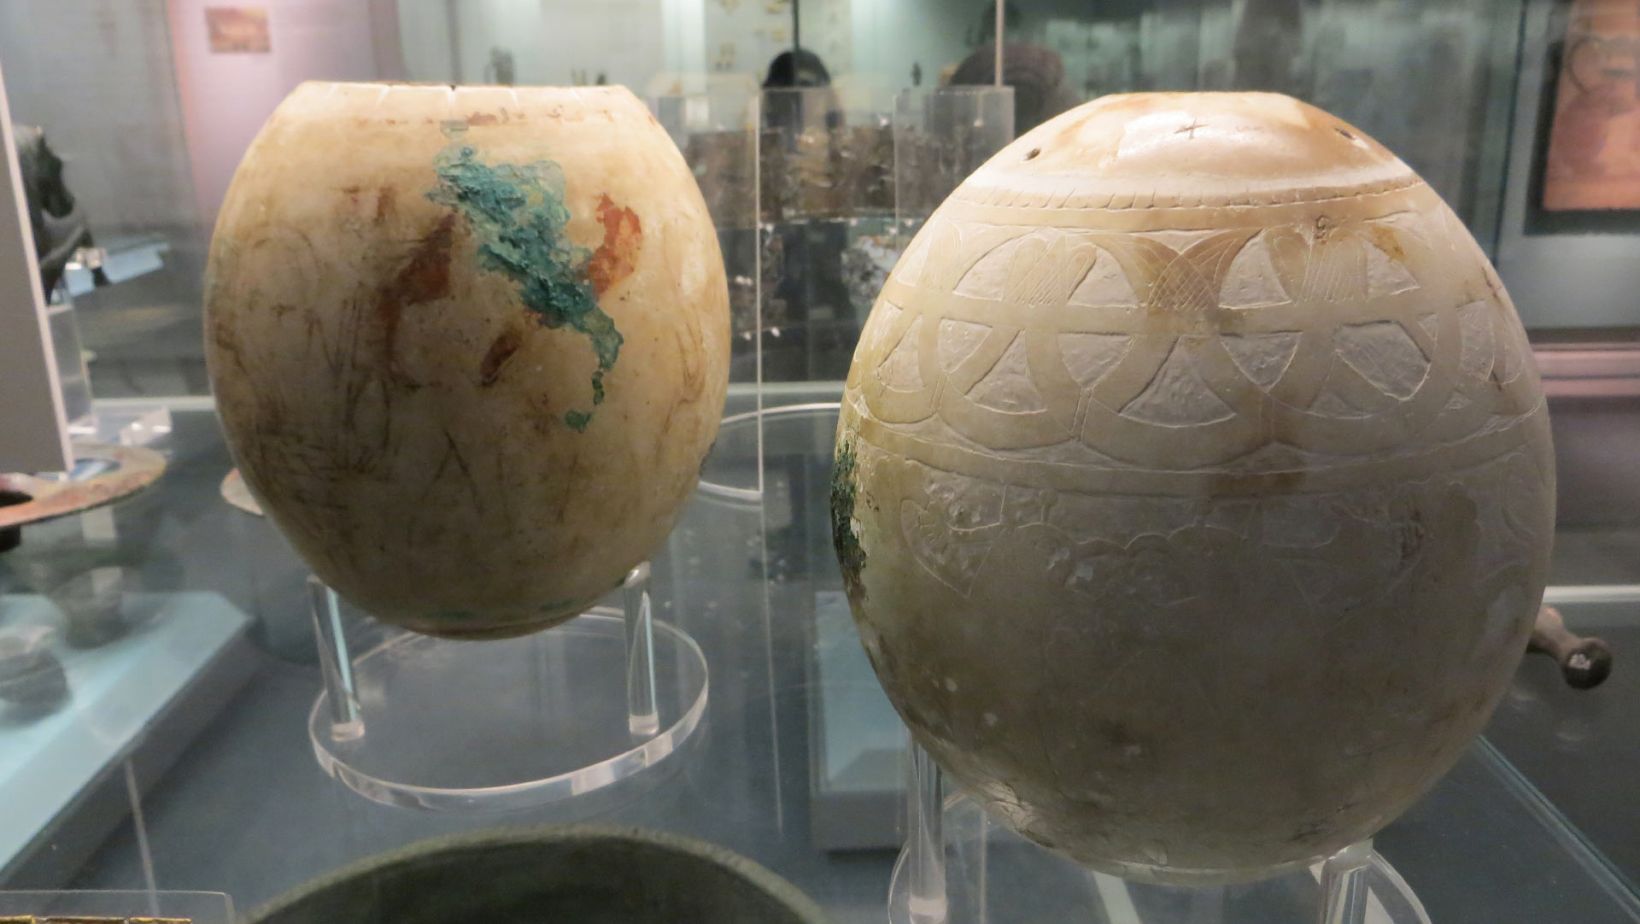 Ancient Ostrich Egg Discovery in Israel